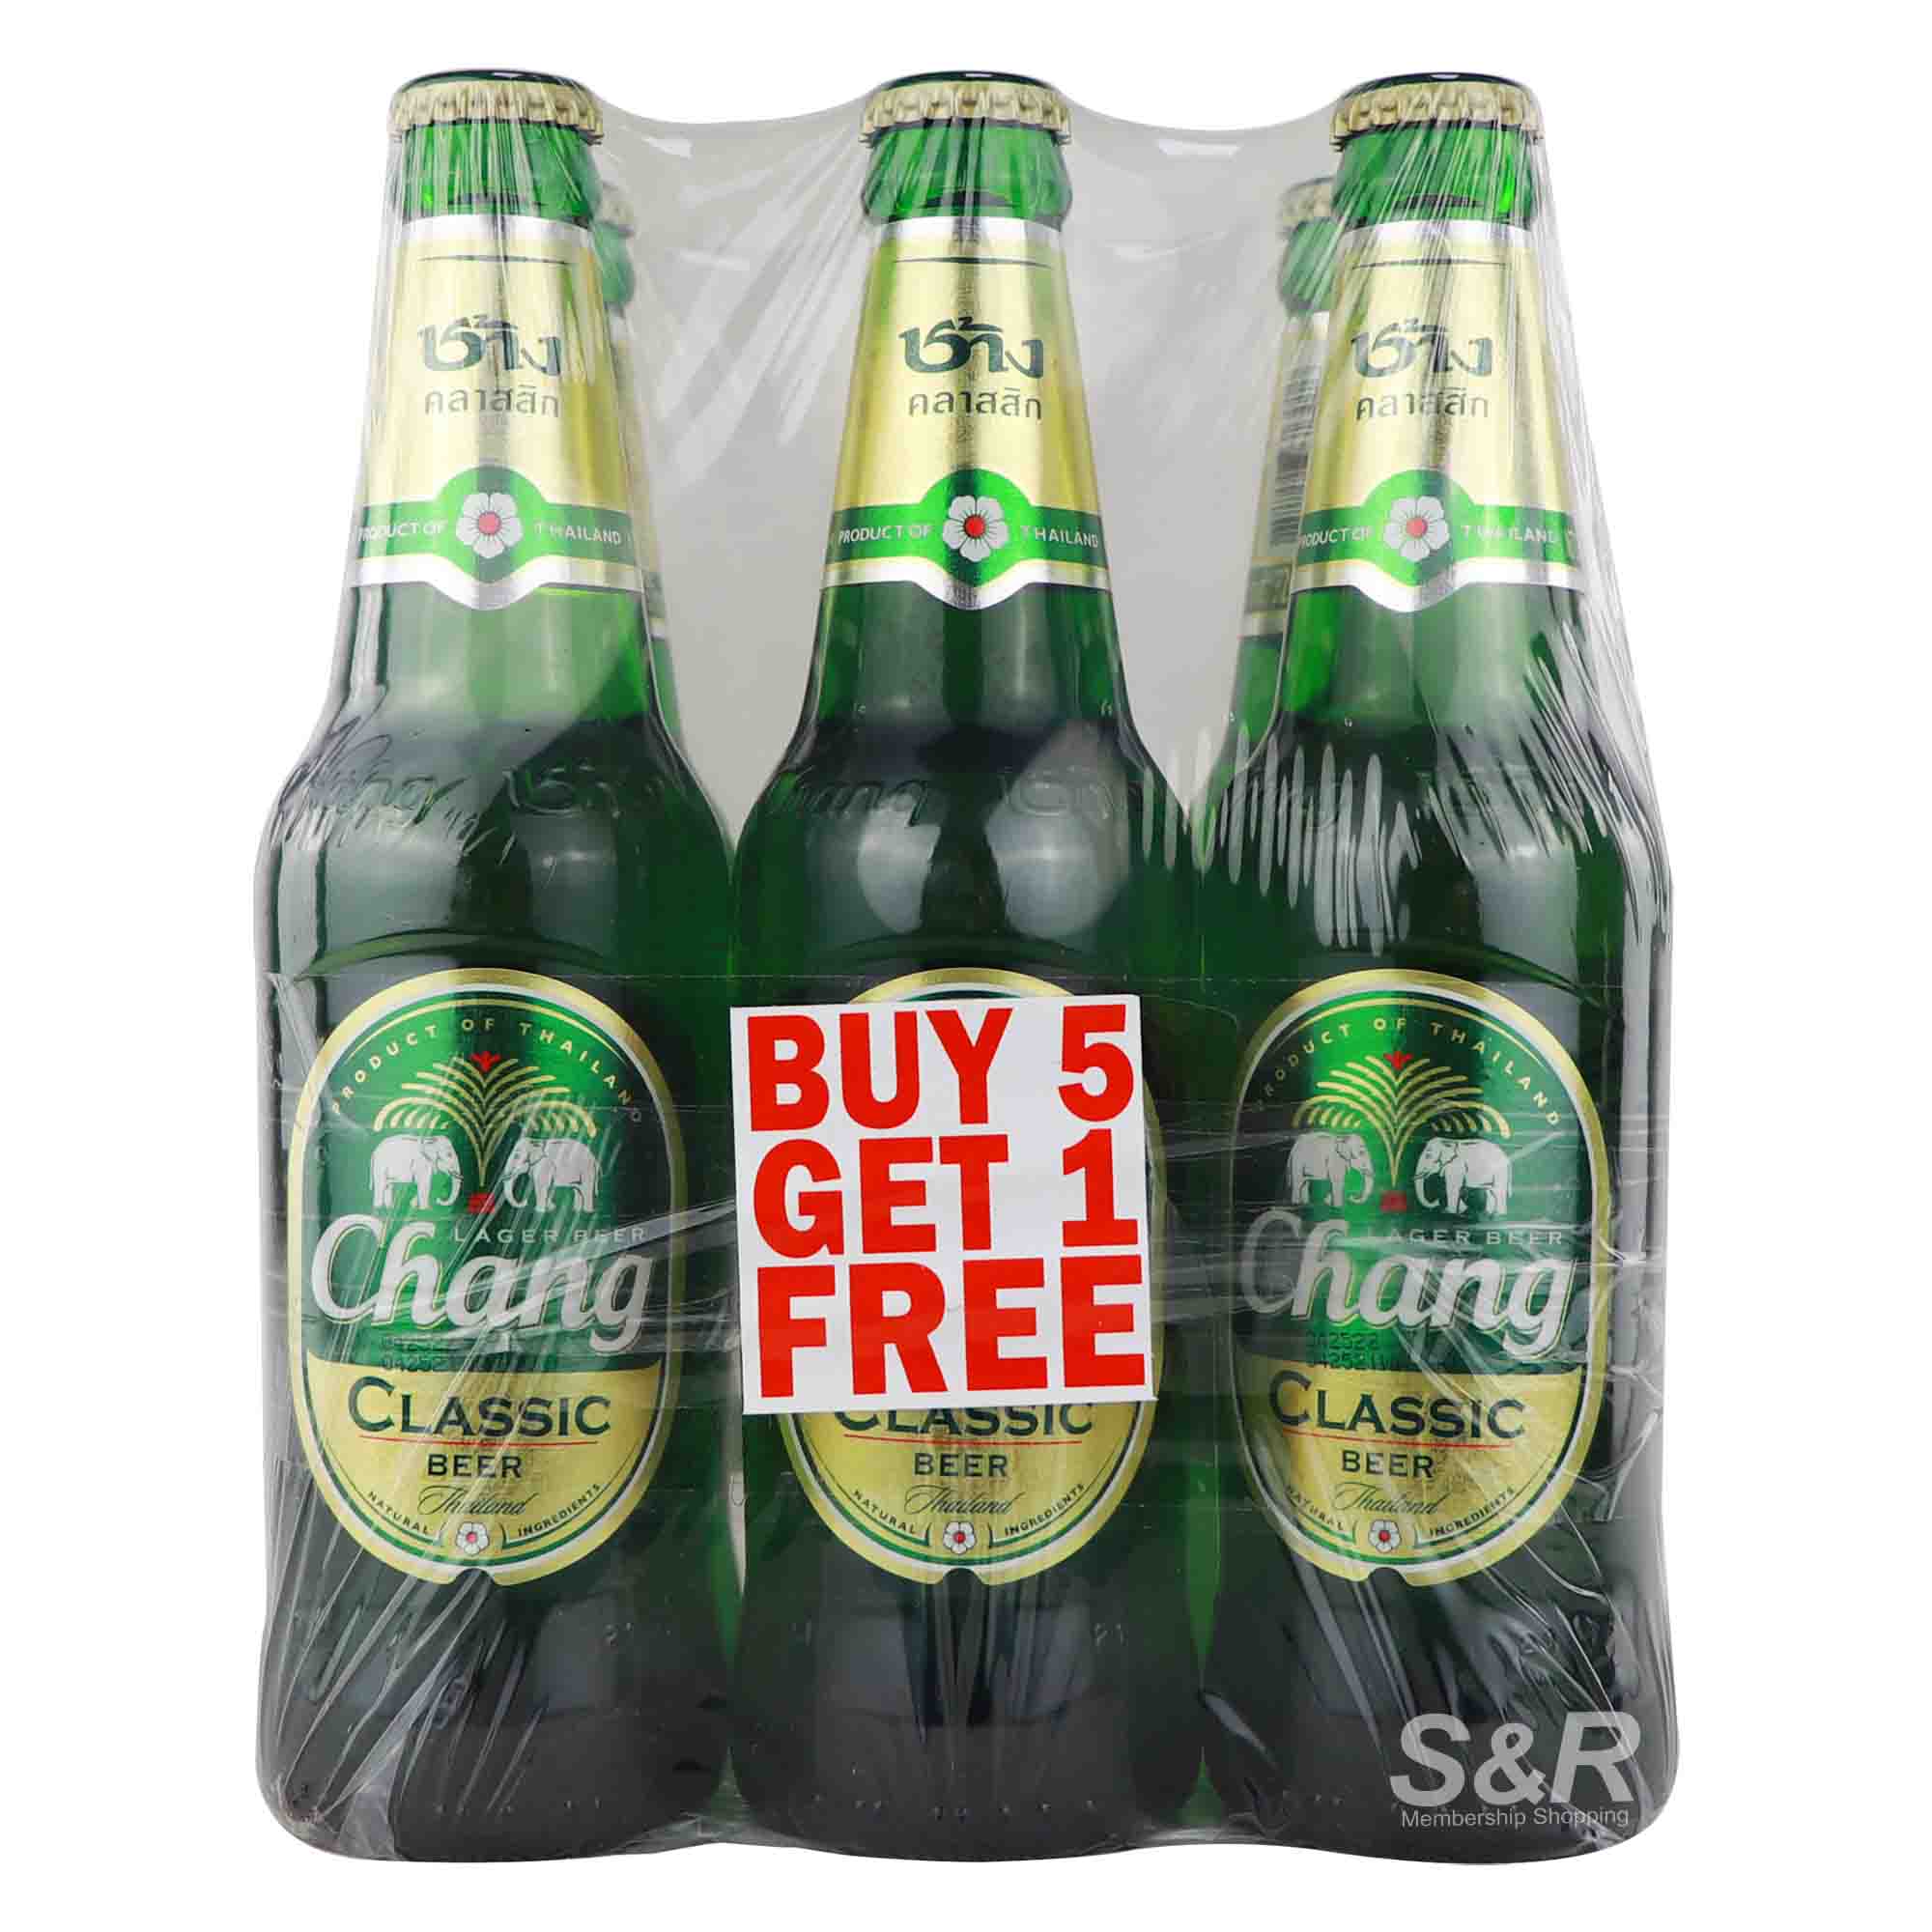 Chang Lager Beer Classic 6 bottles